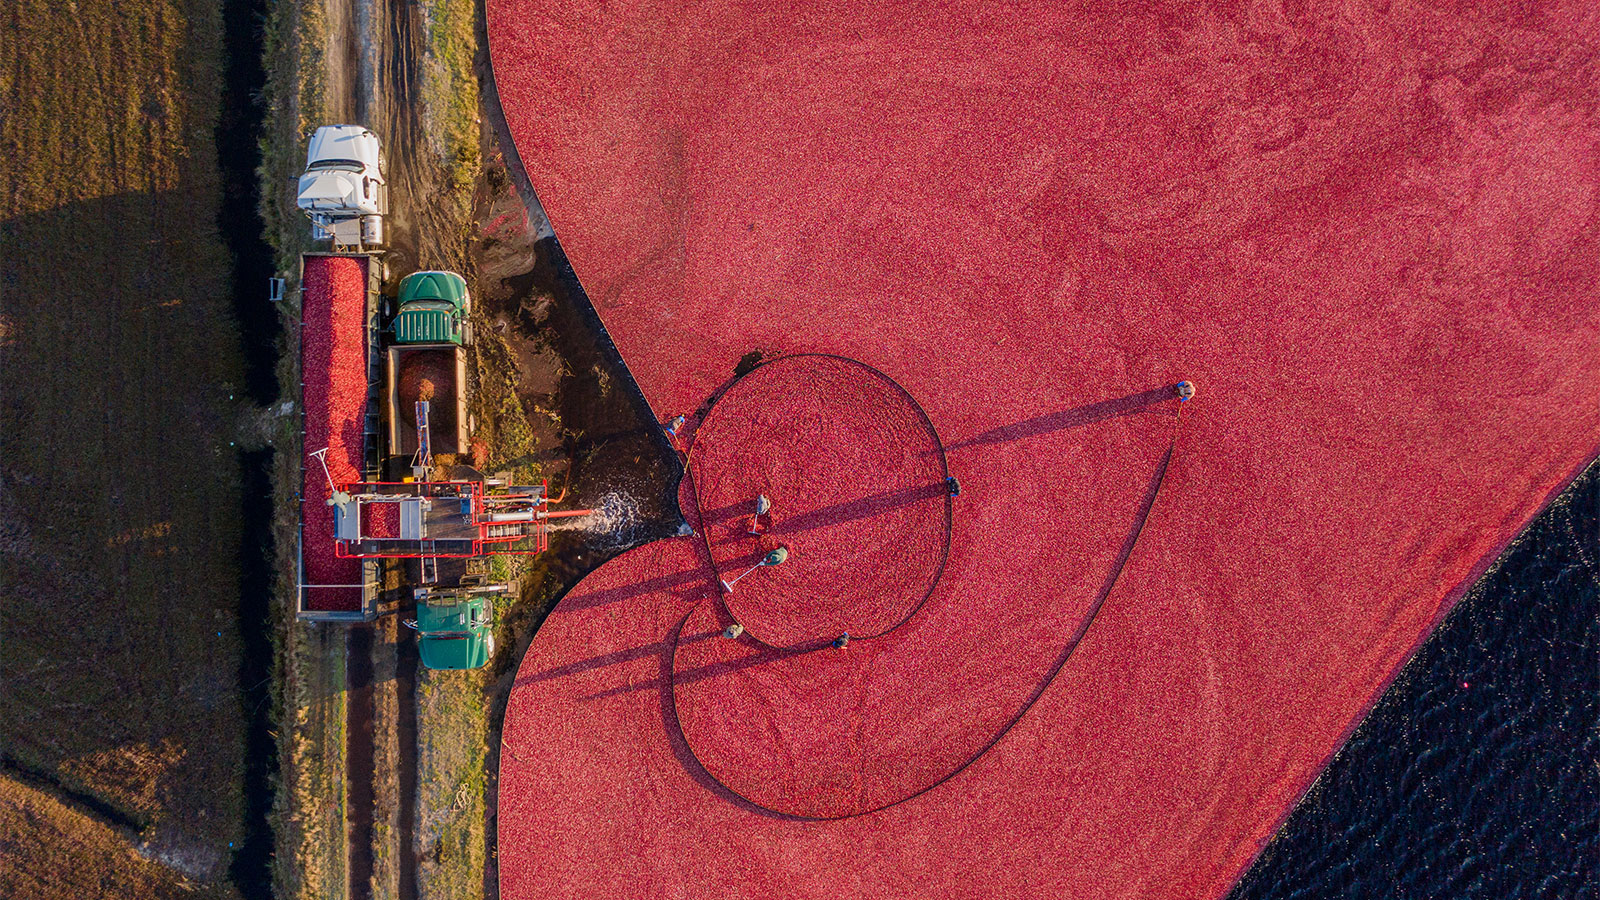 Aerial view of cranberries being harvested by a machine